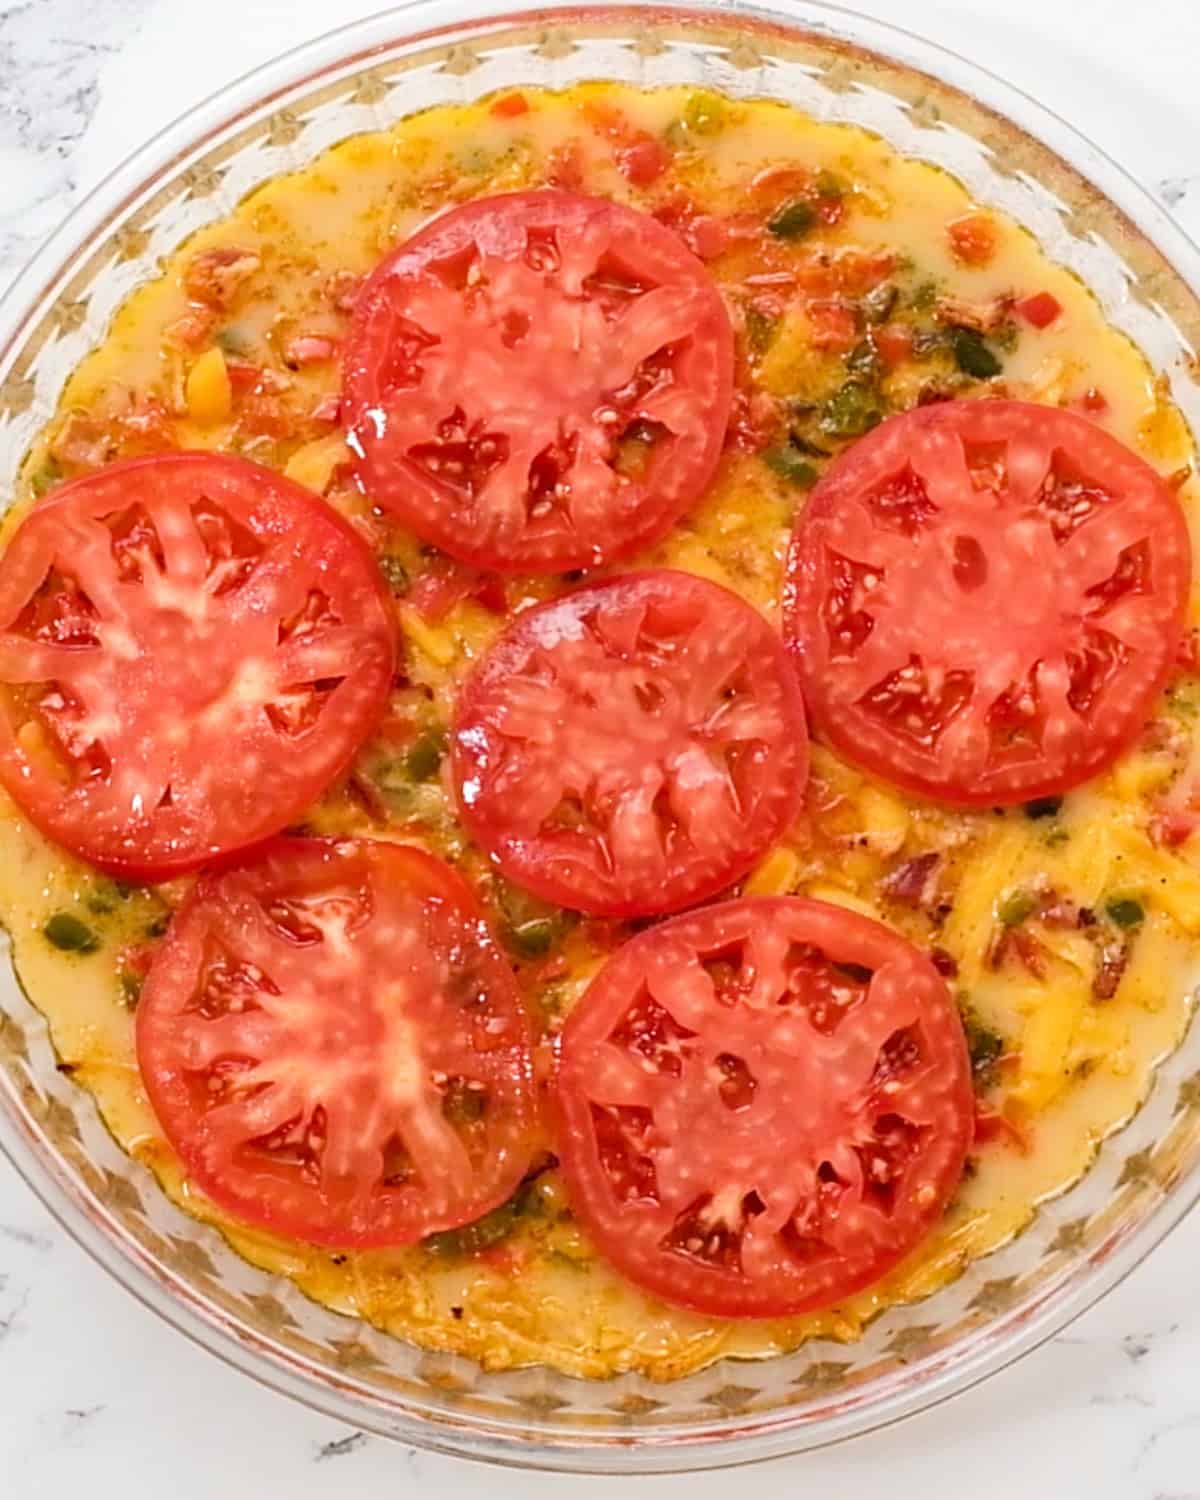 Hash Brown Crust Quiche topped with tomato slices before baking